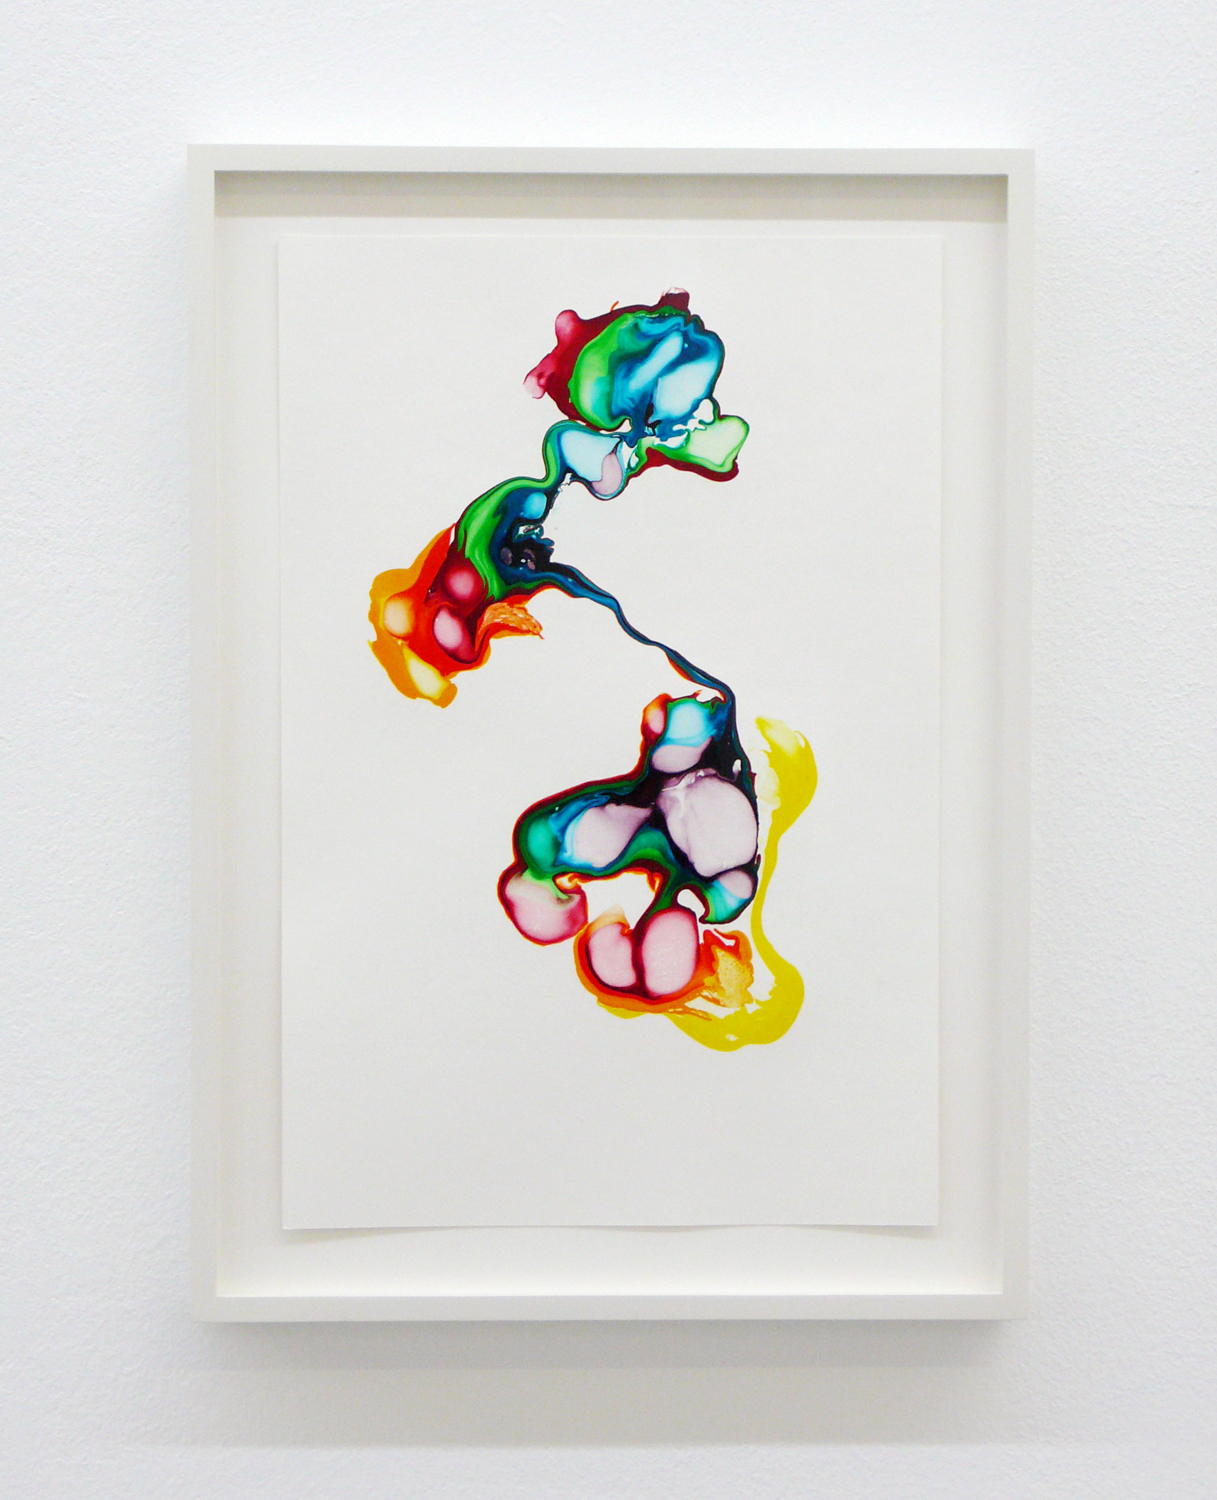   Scattered Rainbow/ ylber , 2014, ink on paper, 29,7 x 20cm 